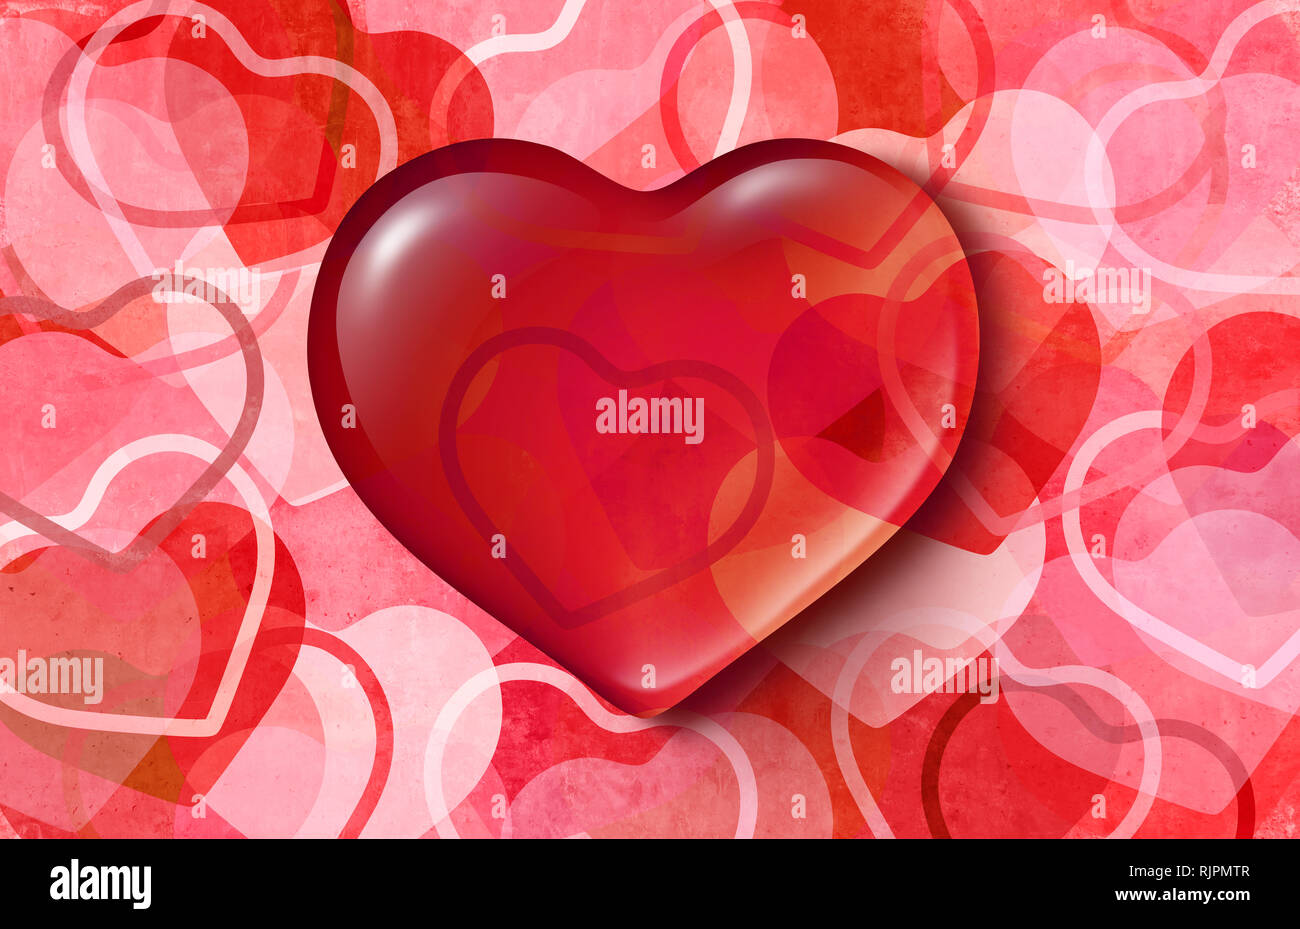 Valentine love heart on an abstract background as a pink and red design representing a romantic holiday pattern with 3D illustration elements. Stock Photo